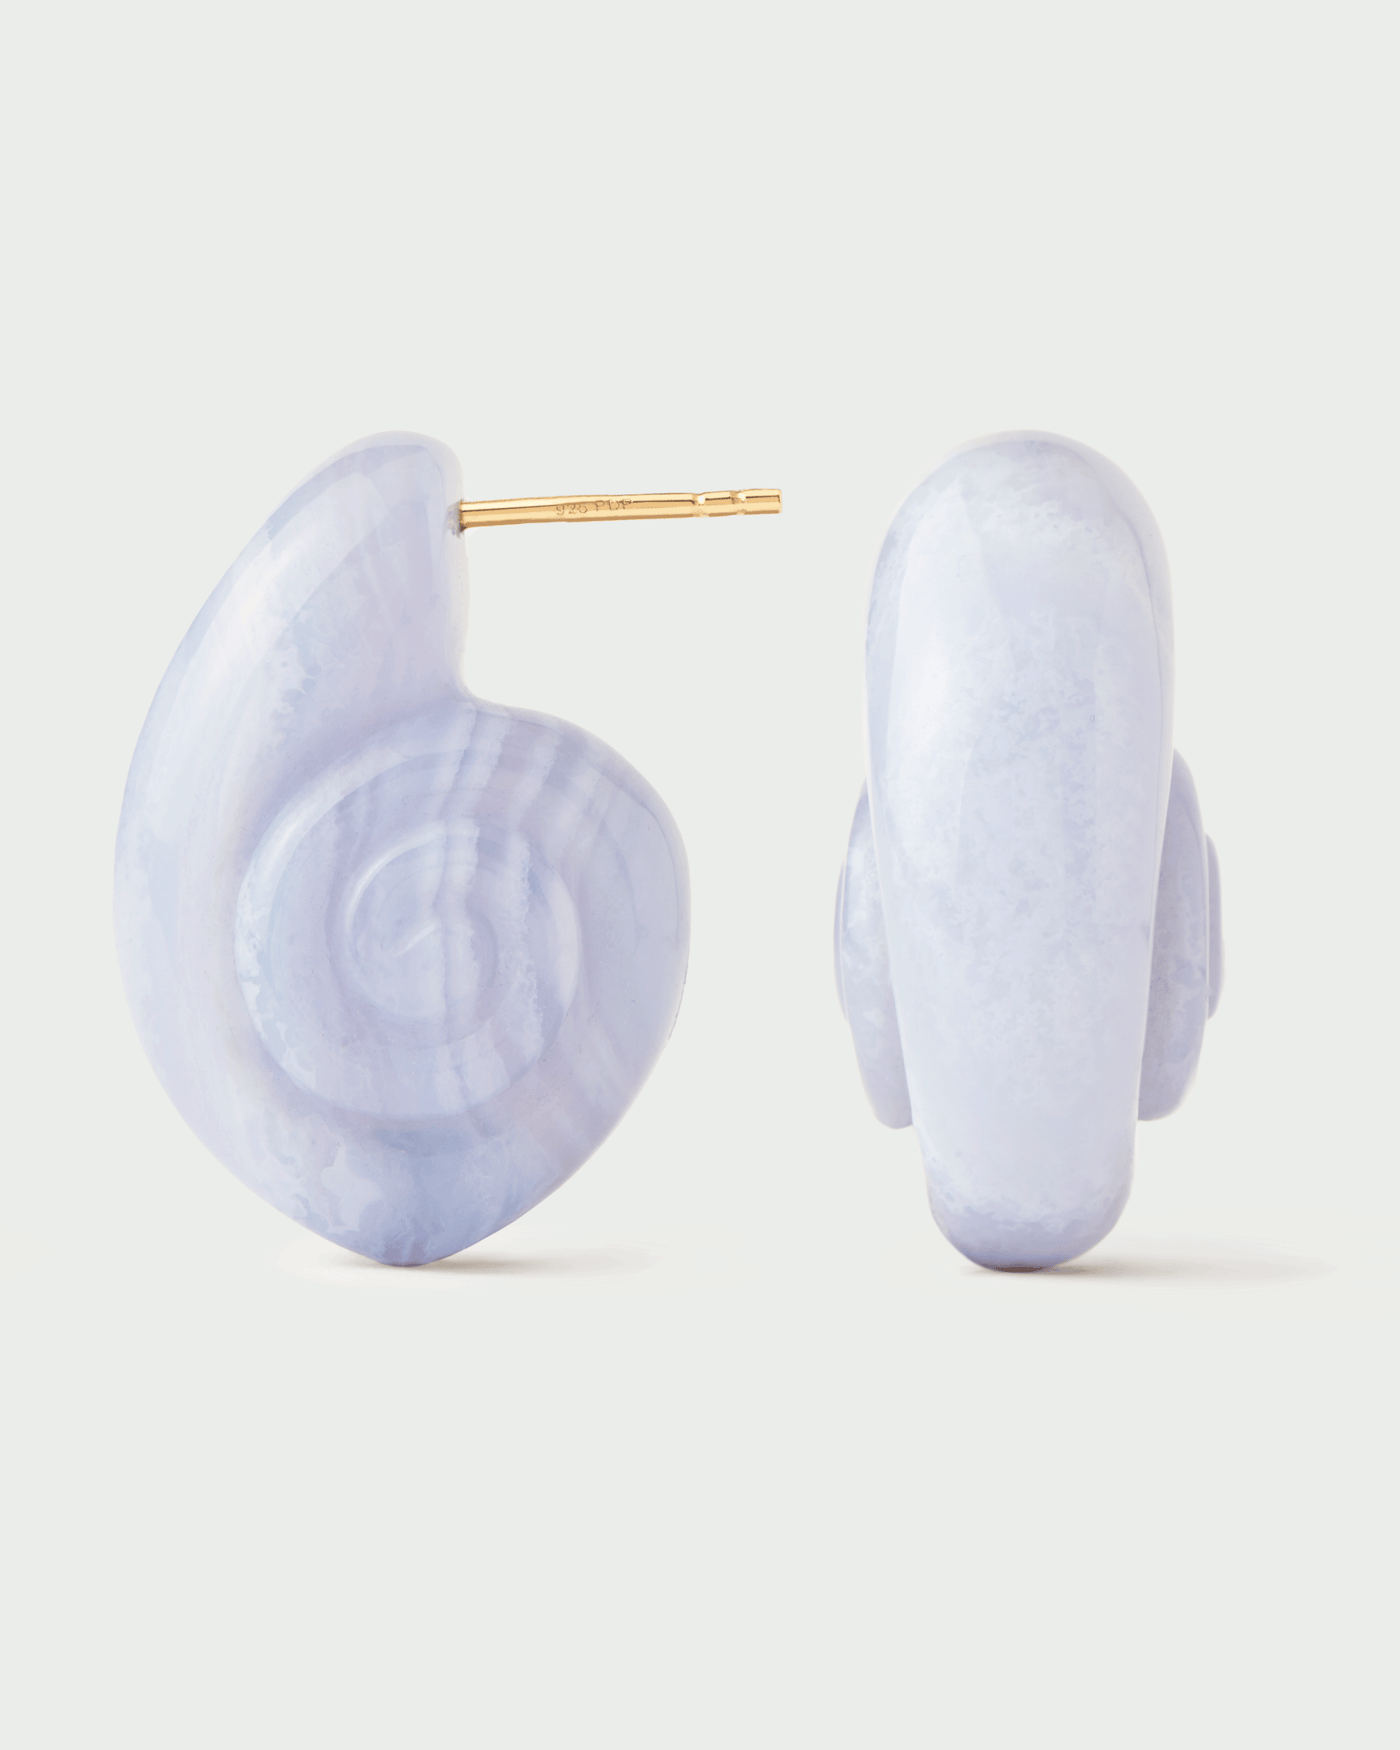 Blue lace agate Shell earrings. Gold-plated sculptural hand-carved blue gemstone sea snail earrings. Get the latest arrival from PDPAOLA. Place your order safely and get this Best Seller.